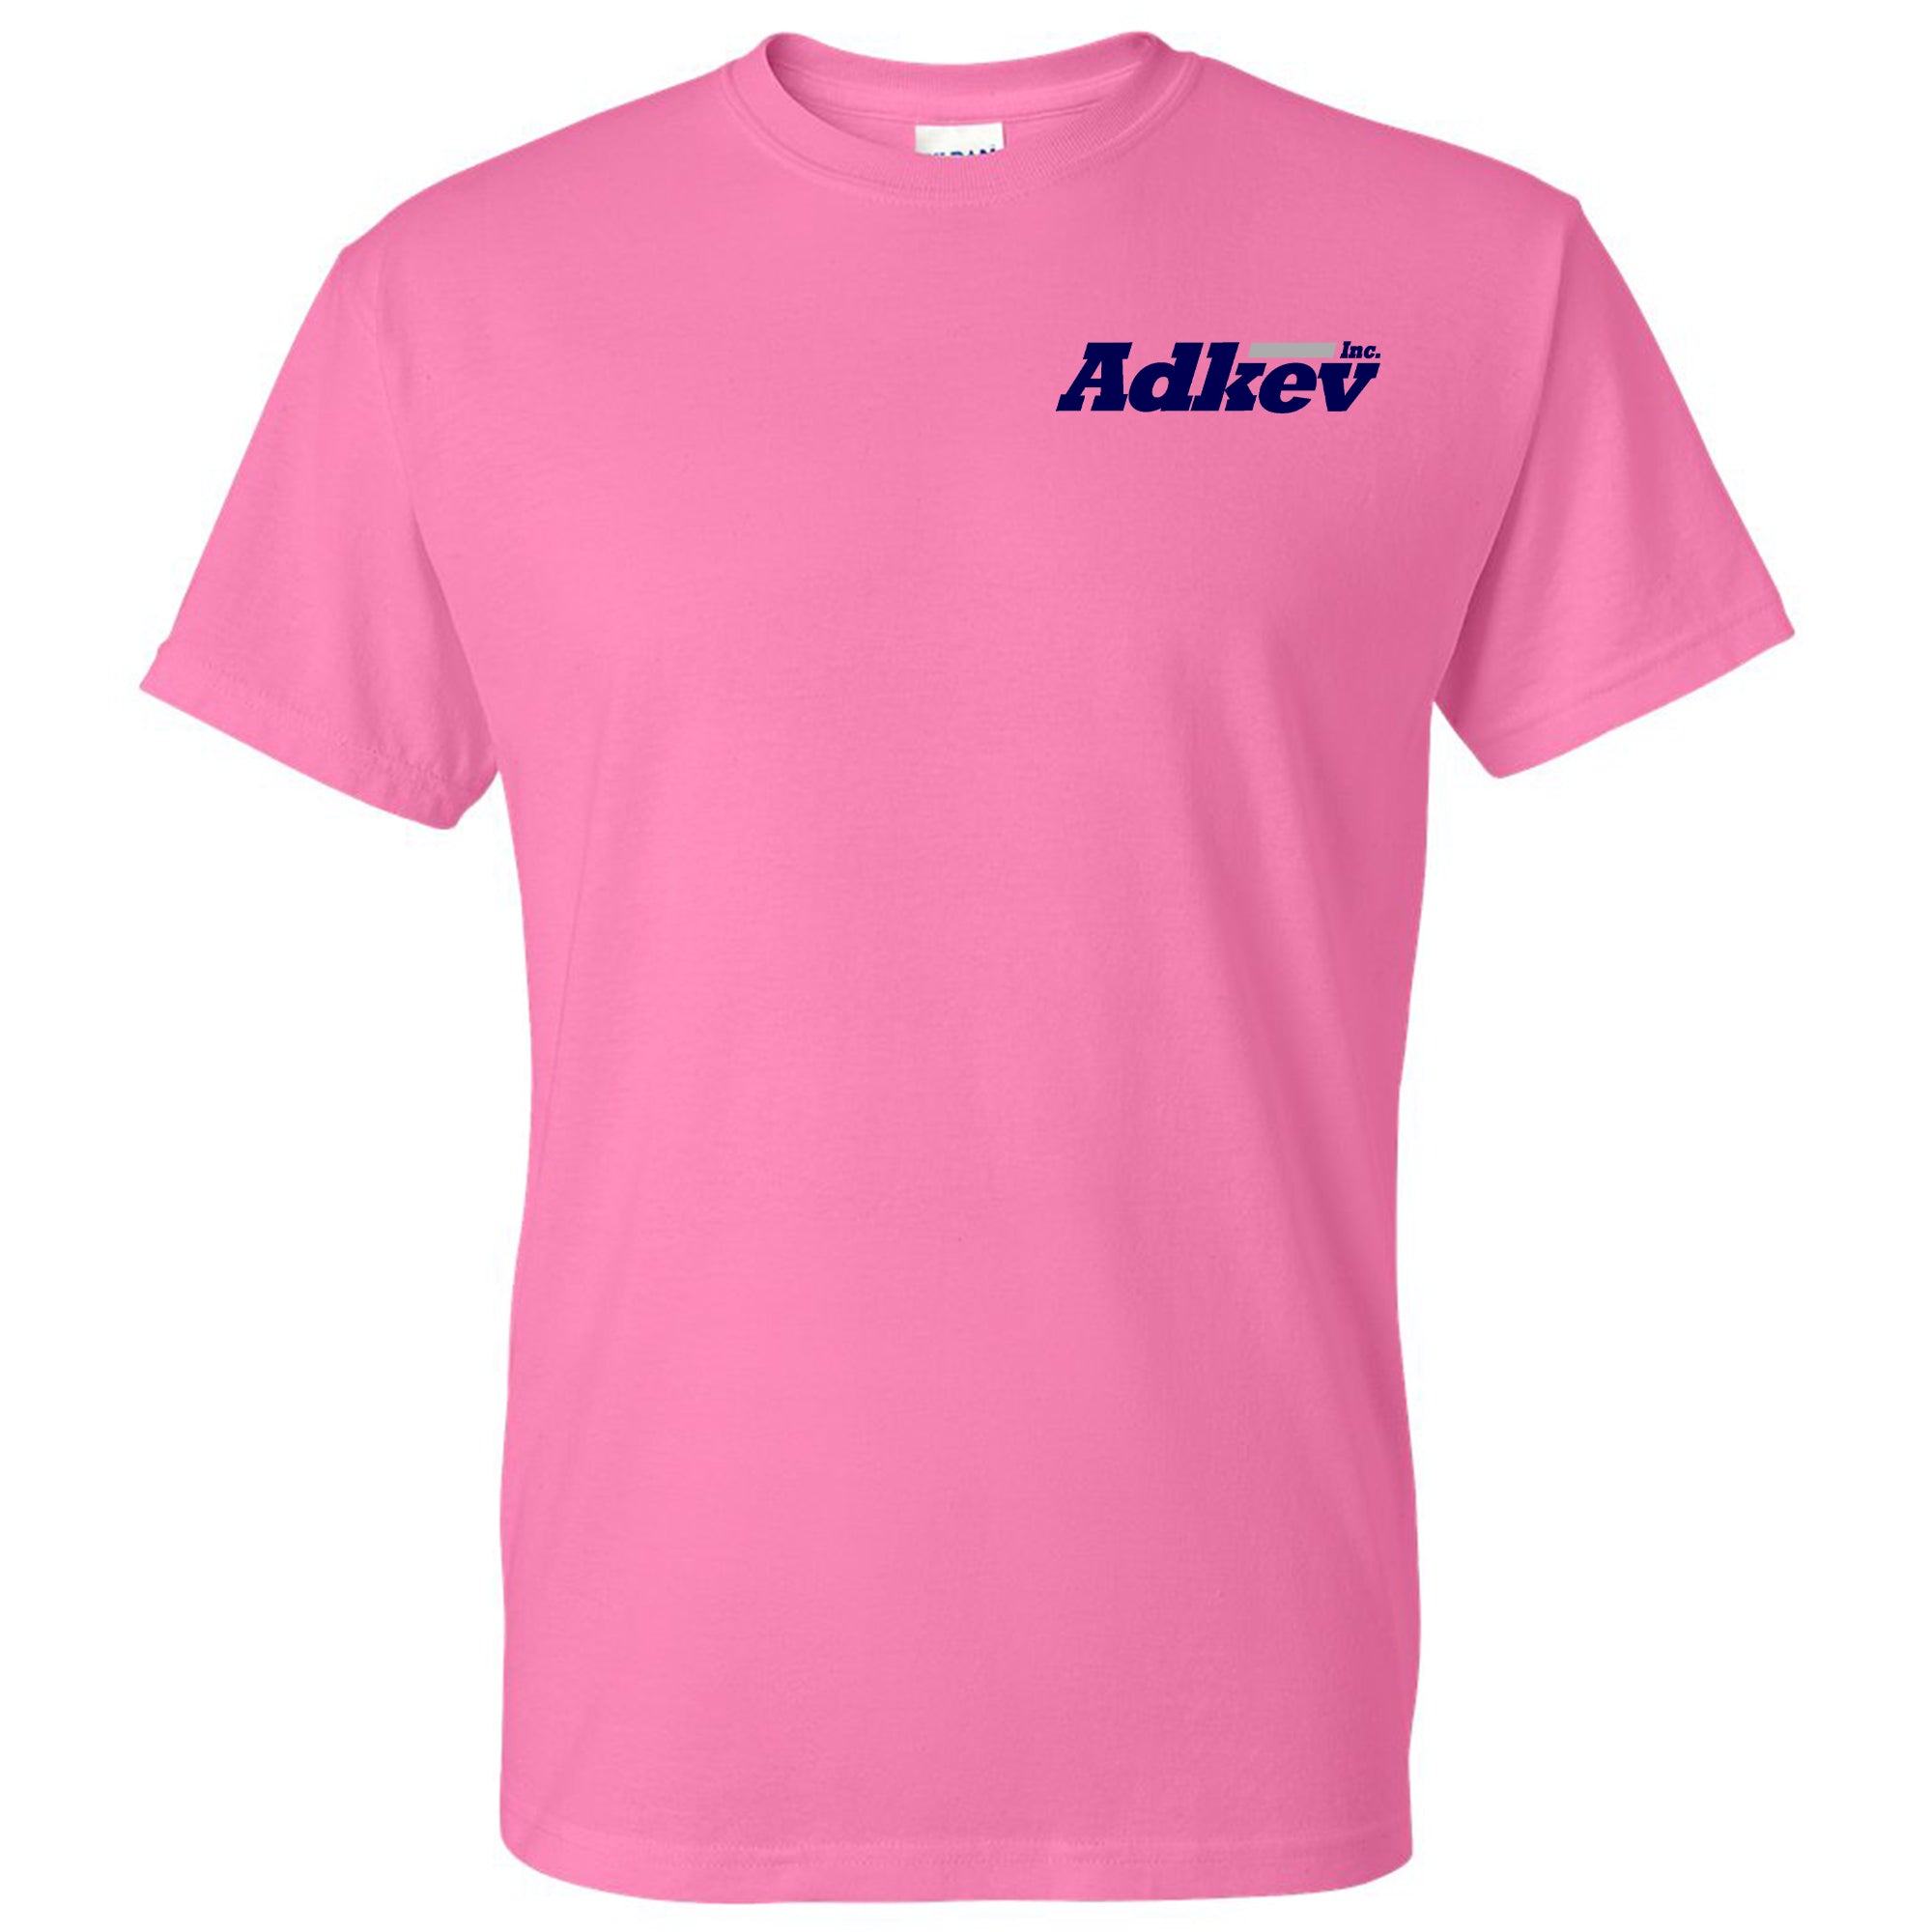 Adkev Softstyle T-shirt – Reinforcements Design